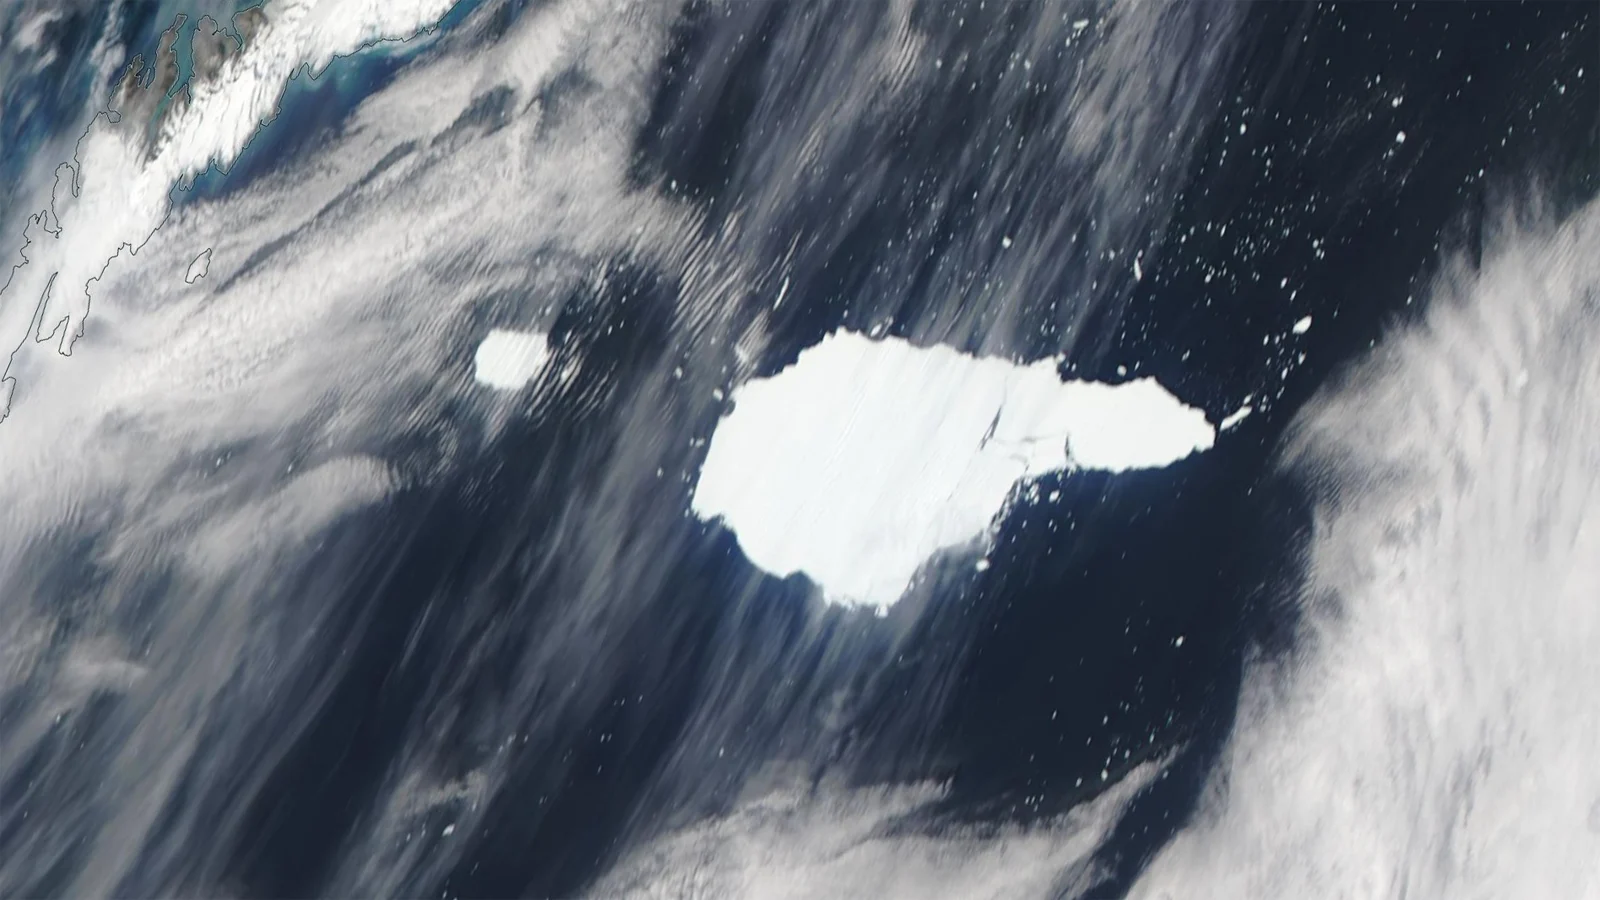 Giant iceberg A-68a shatters after collision with South Georgia Island shelf